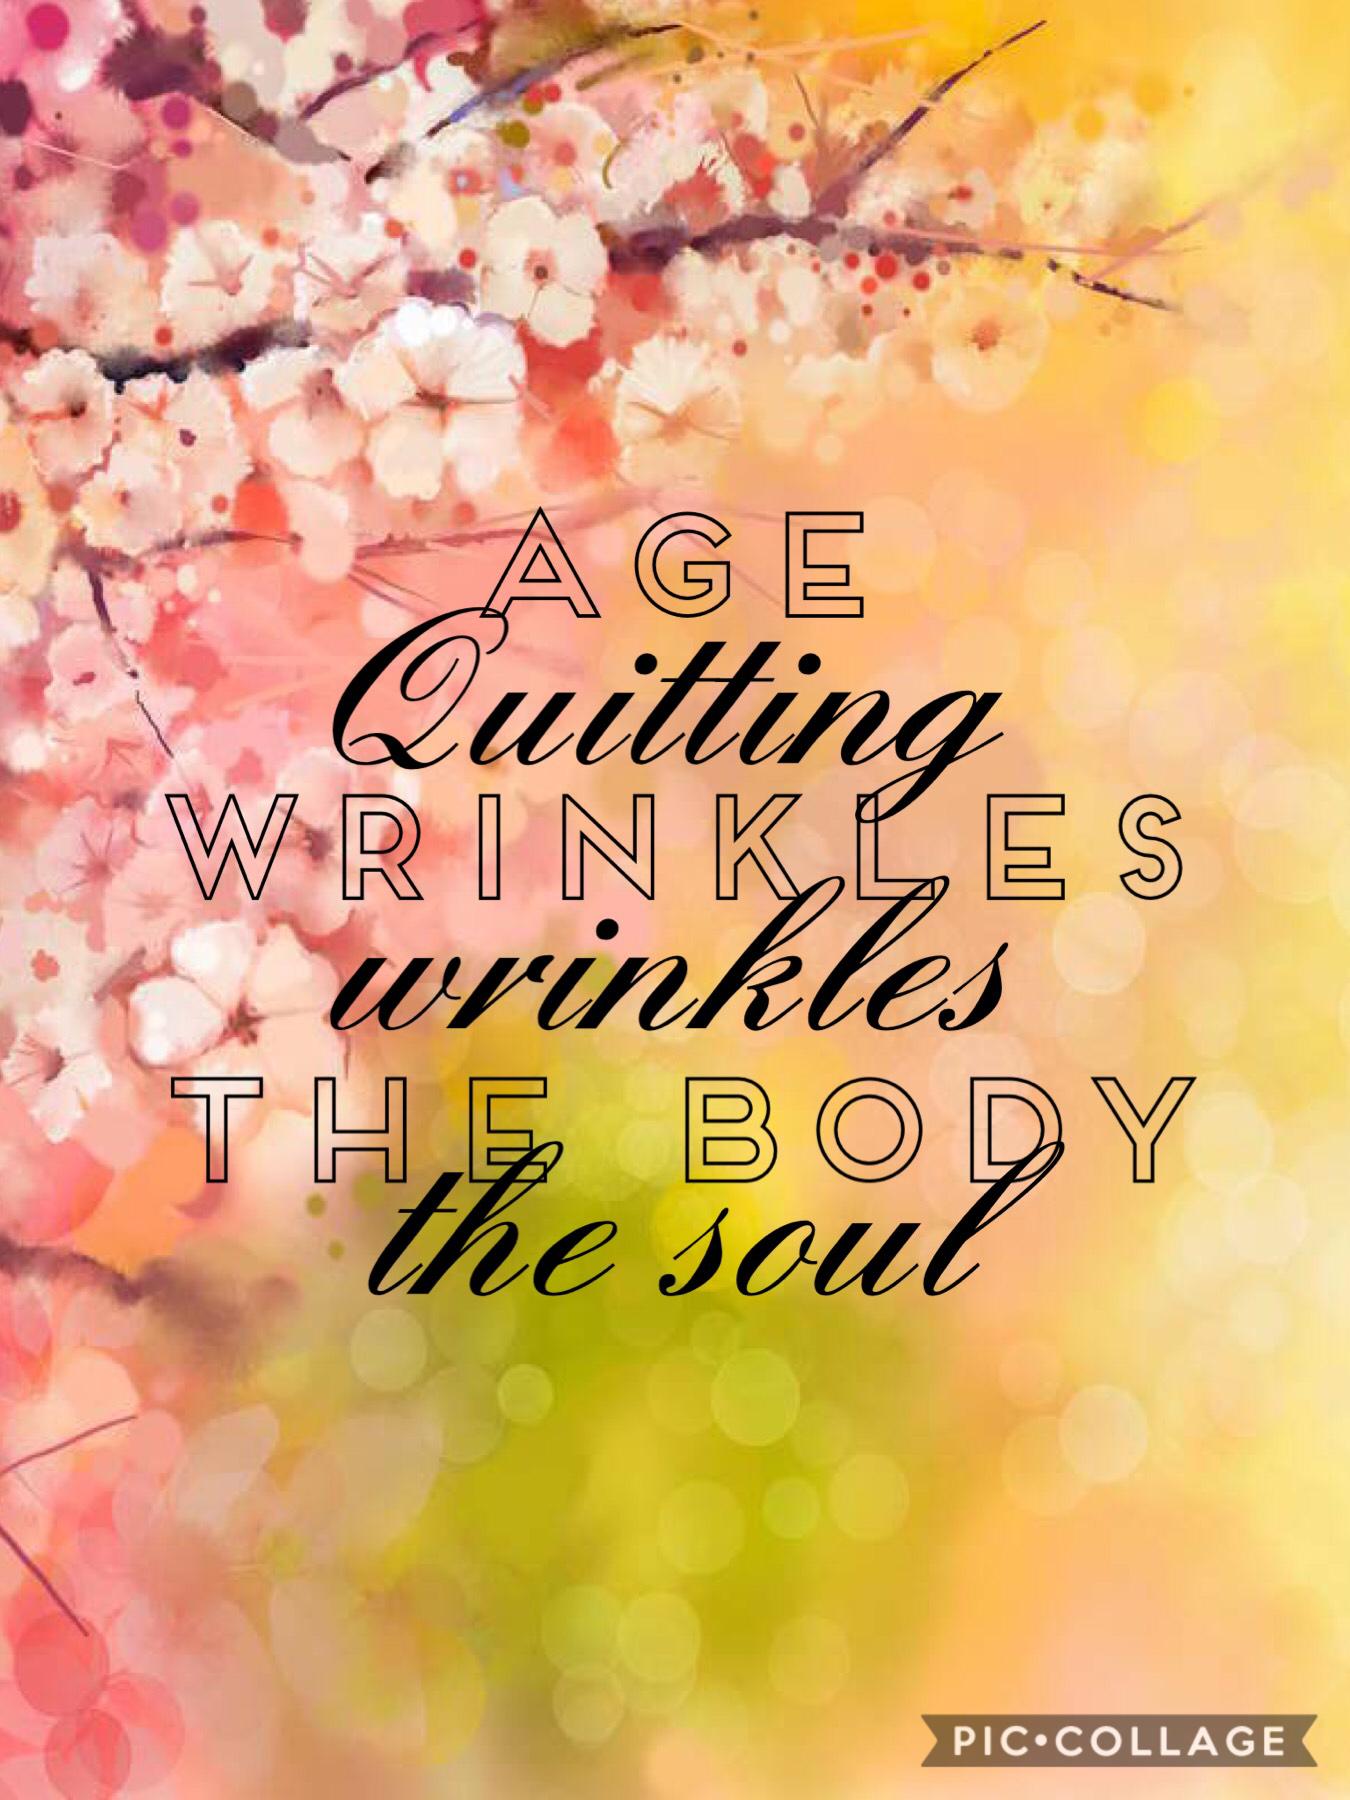 Age wrinkles the body. Quitting wrinkles the soul.